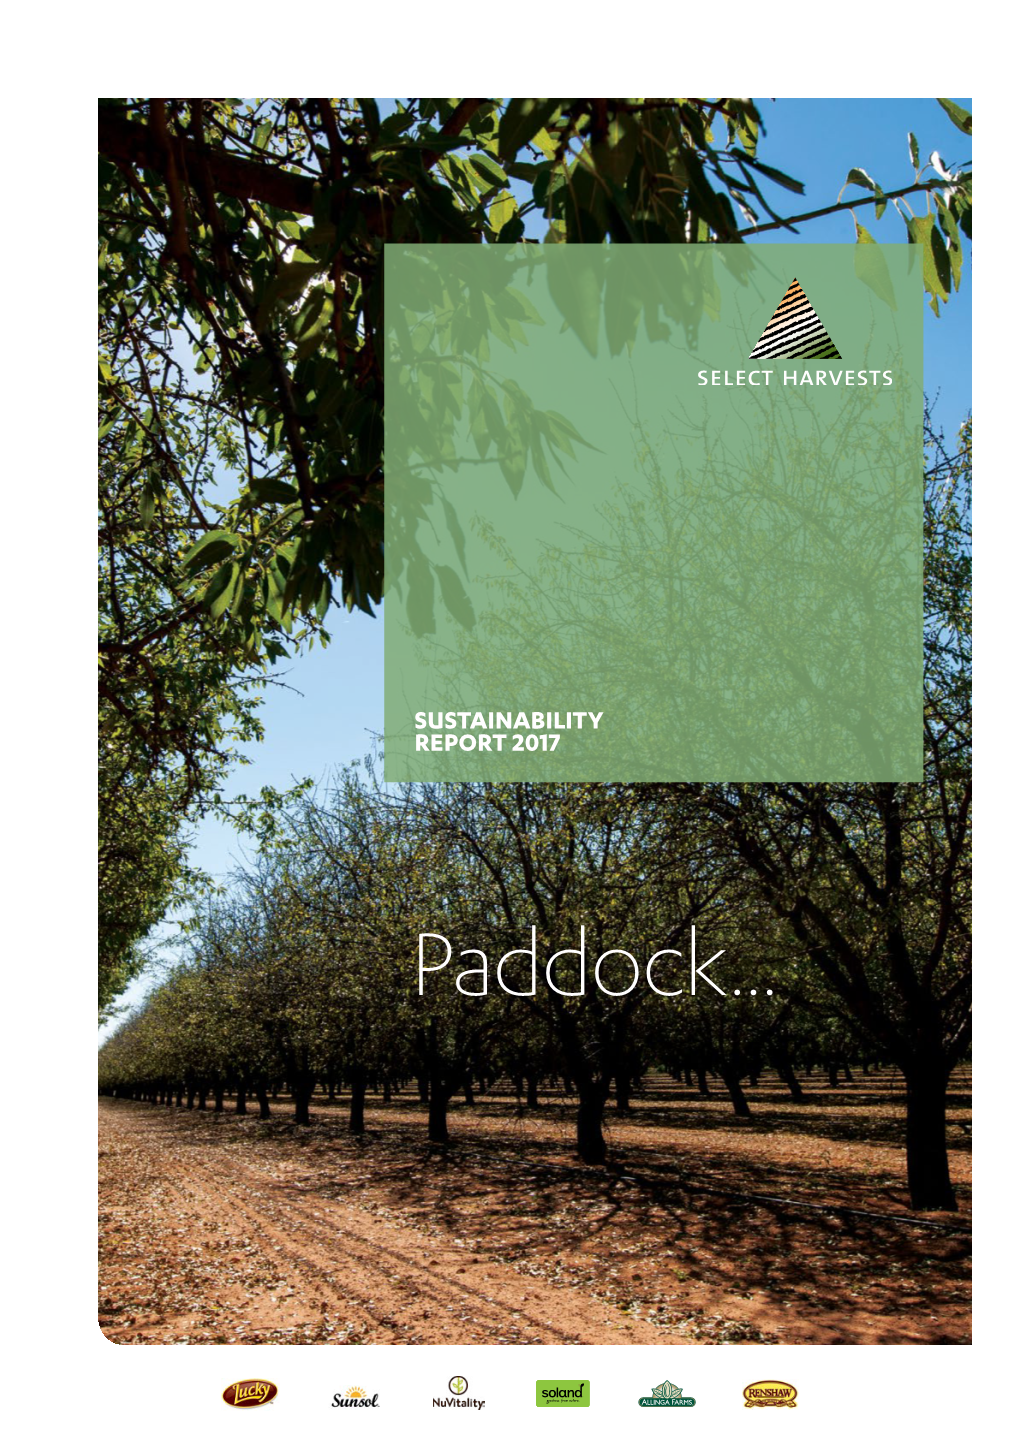 Paddock... Select Harvests Sustainability Report 2017